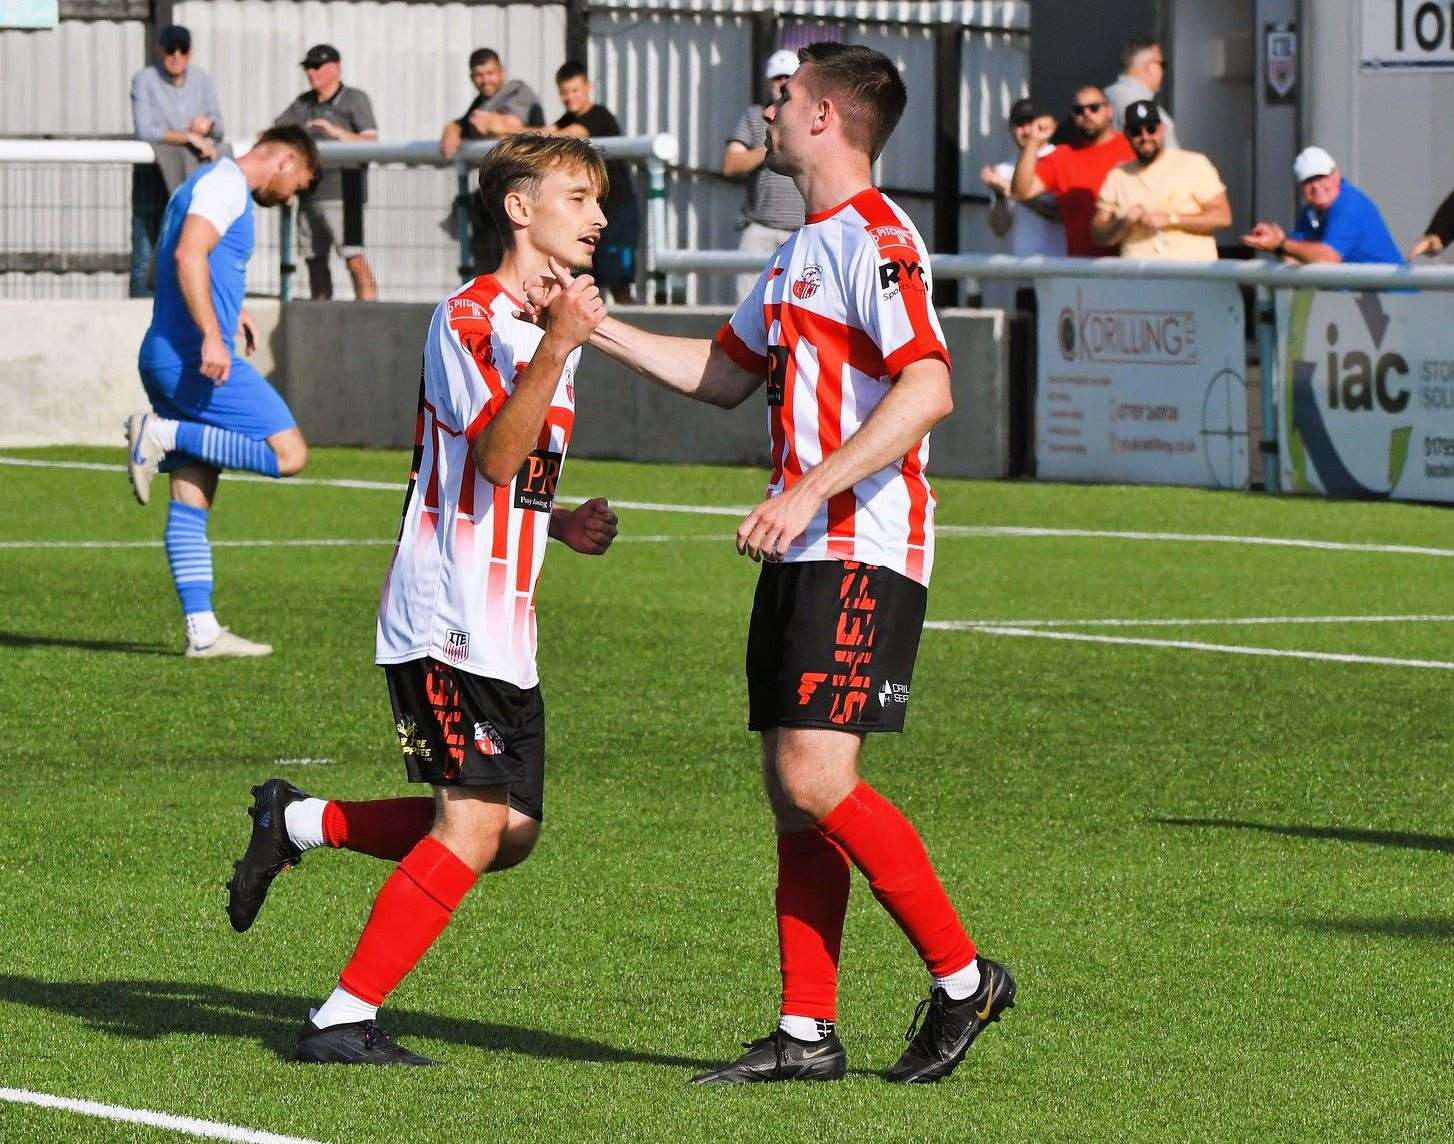 Two-goal Jacob Lambert is congratulated by team-mate and fellow scorer Danny Leonard in Sheppey’s 3-1 FA Cup home win over Kennington on Saturday. Picture: Marc Richards